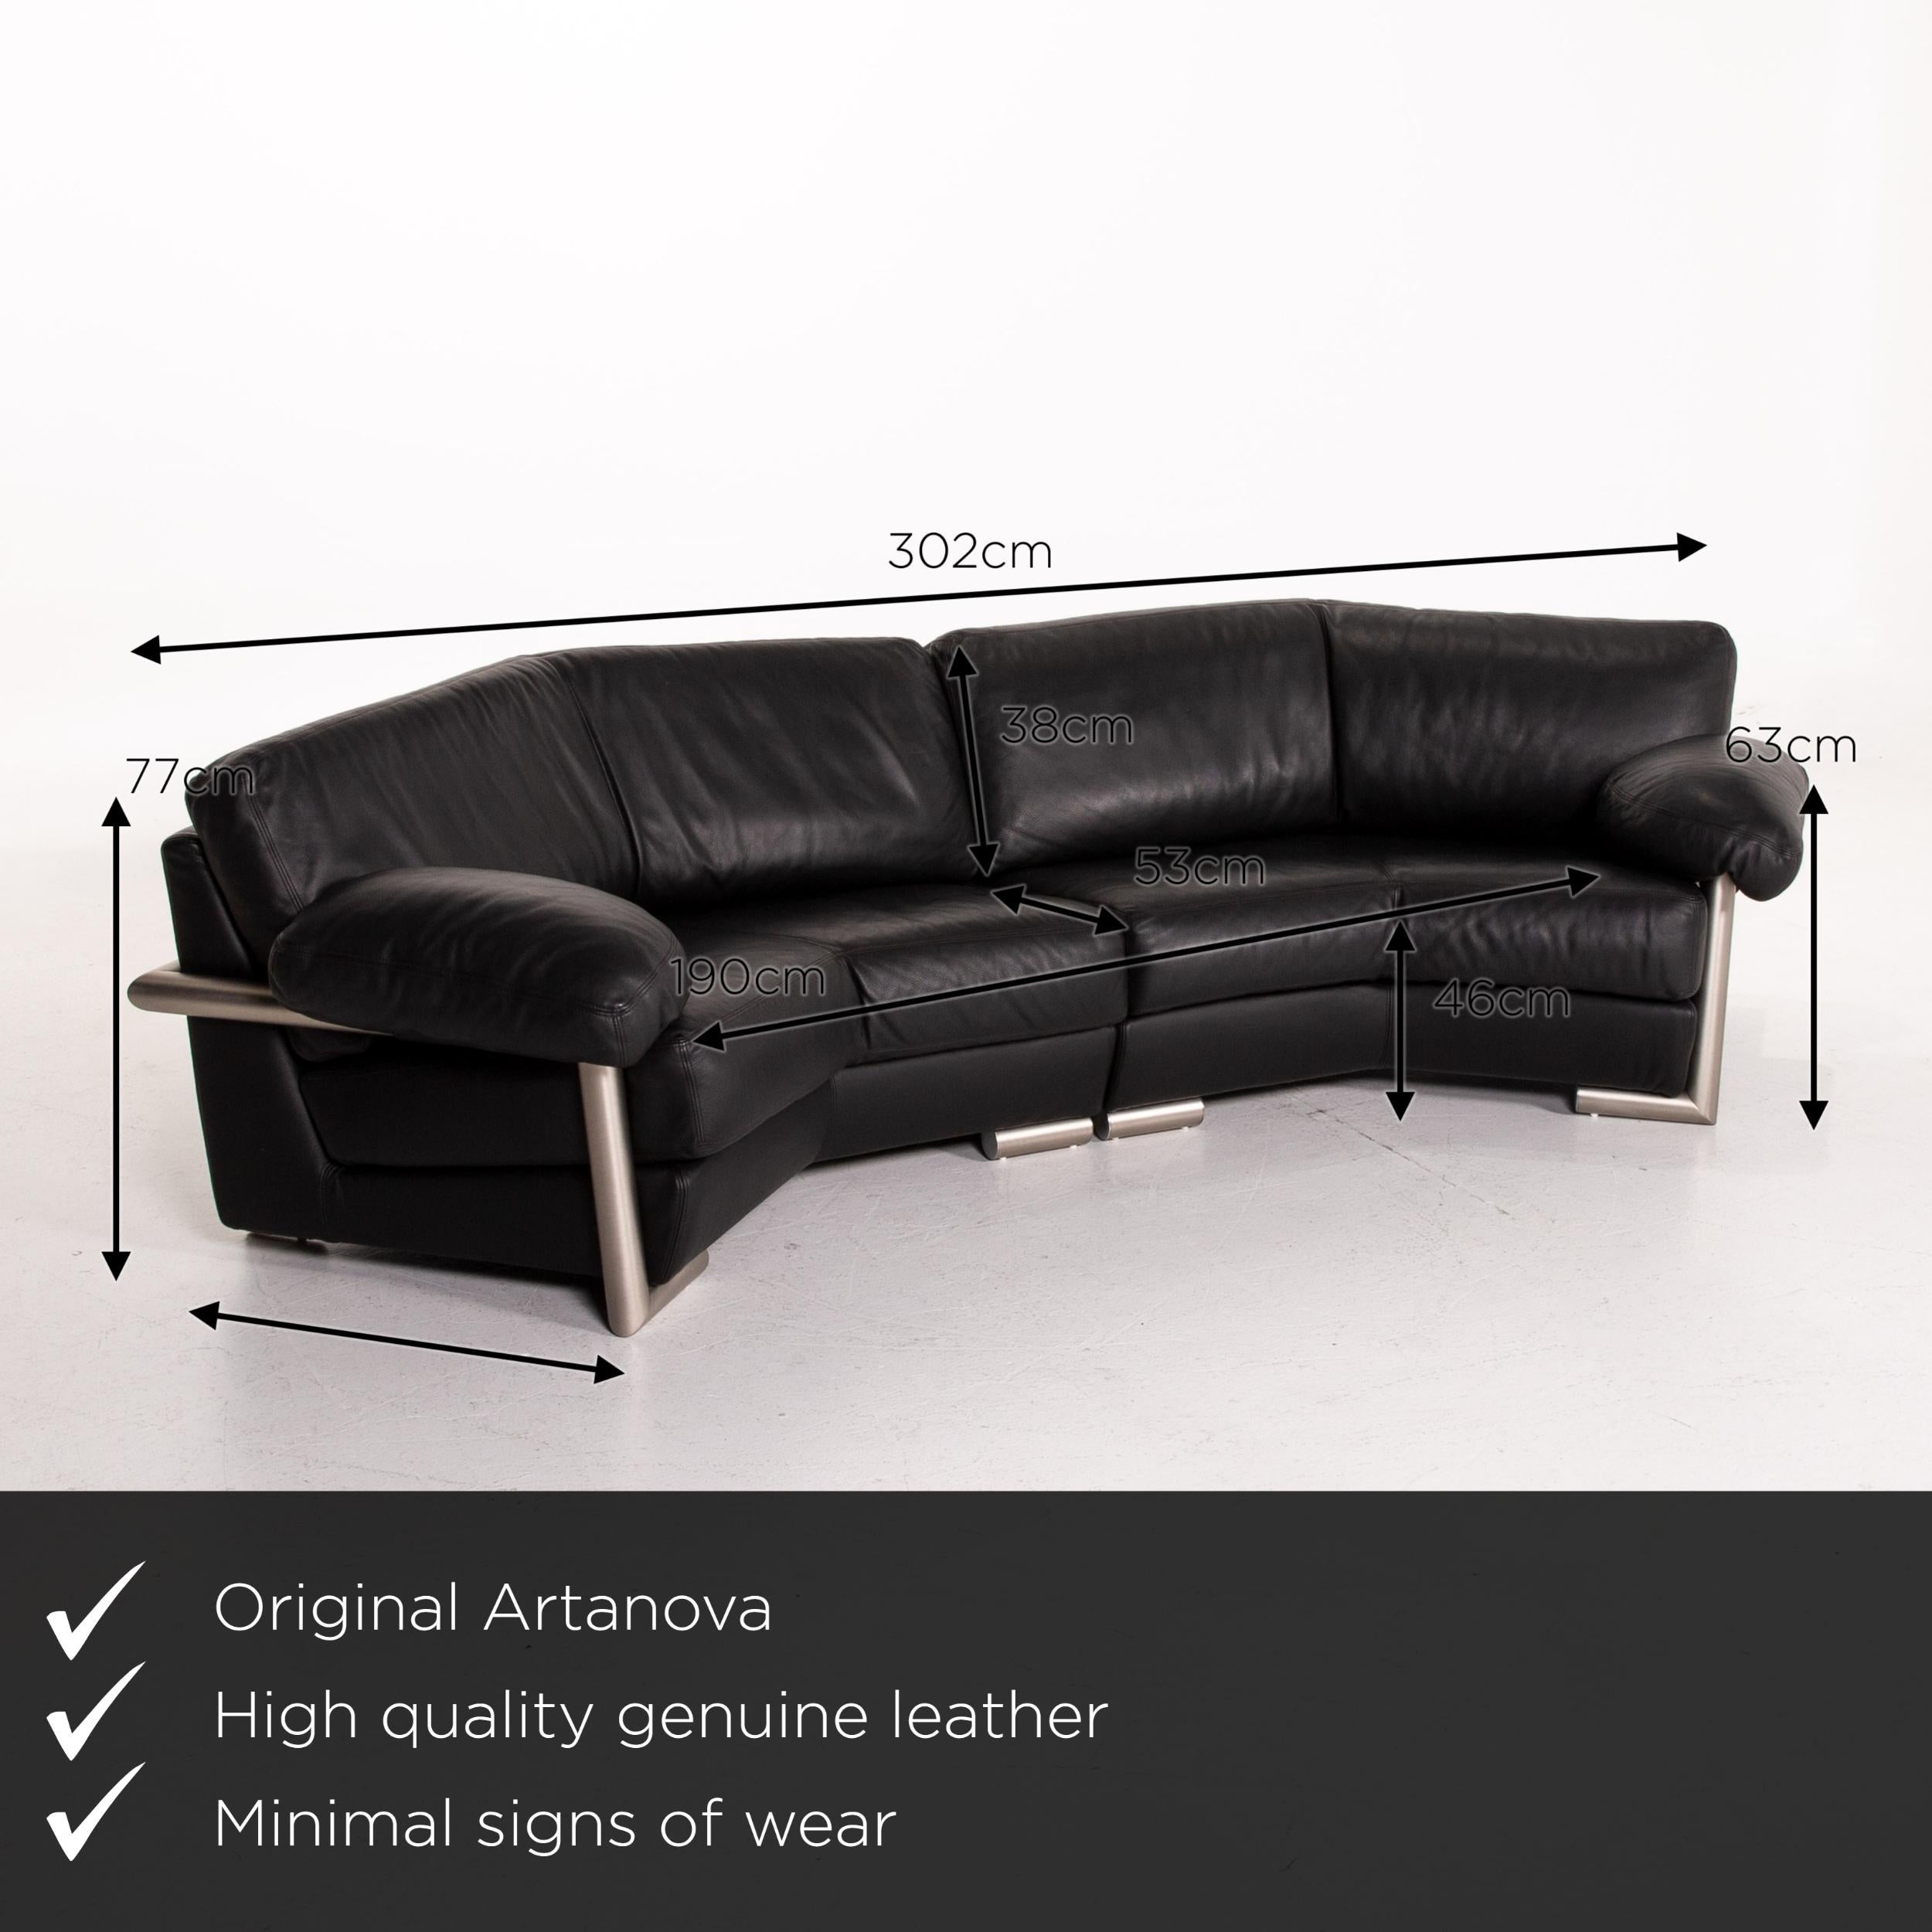 We present to you an Artanova Medea leather corner sofa black sofa couch Michael C. Brandis.

Product measurements in centimeters:

Depth 135
Width 302
Height 77
Seat height 46
Rest height 63
Seat depth 53
Seat width 190
Back height